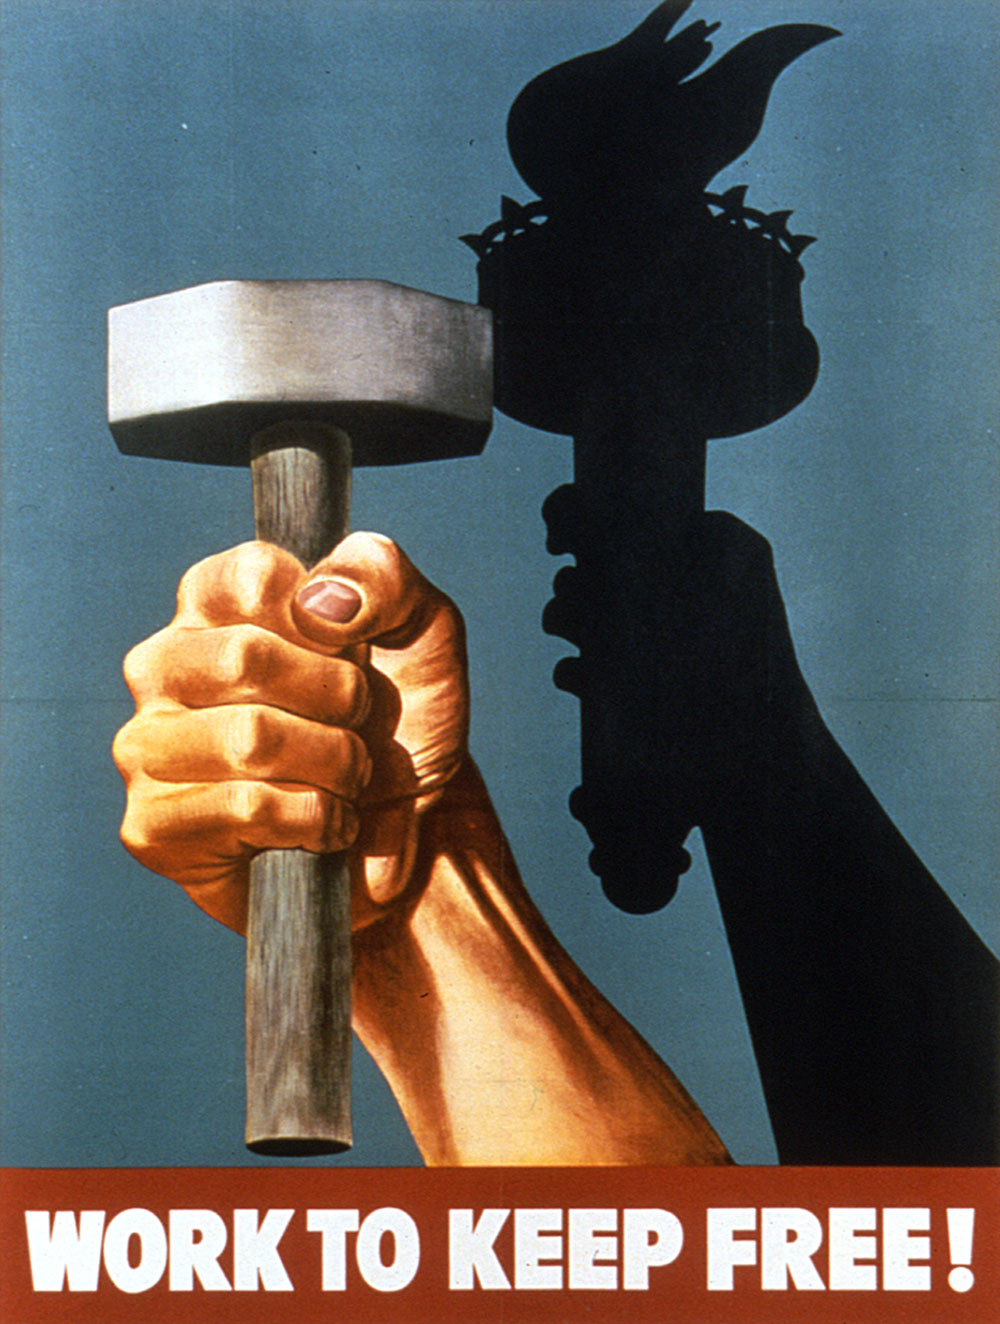 Poster depicting a raised hand clenching a hammer casting a shadow of the Statue of Liberty's hand grasping a torch